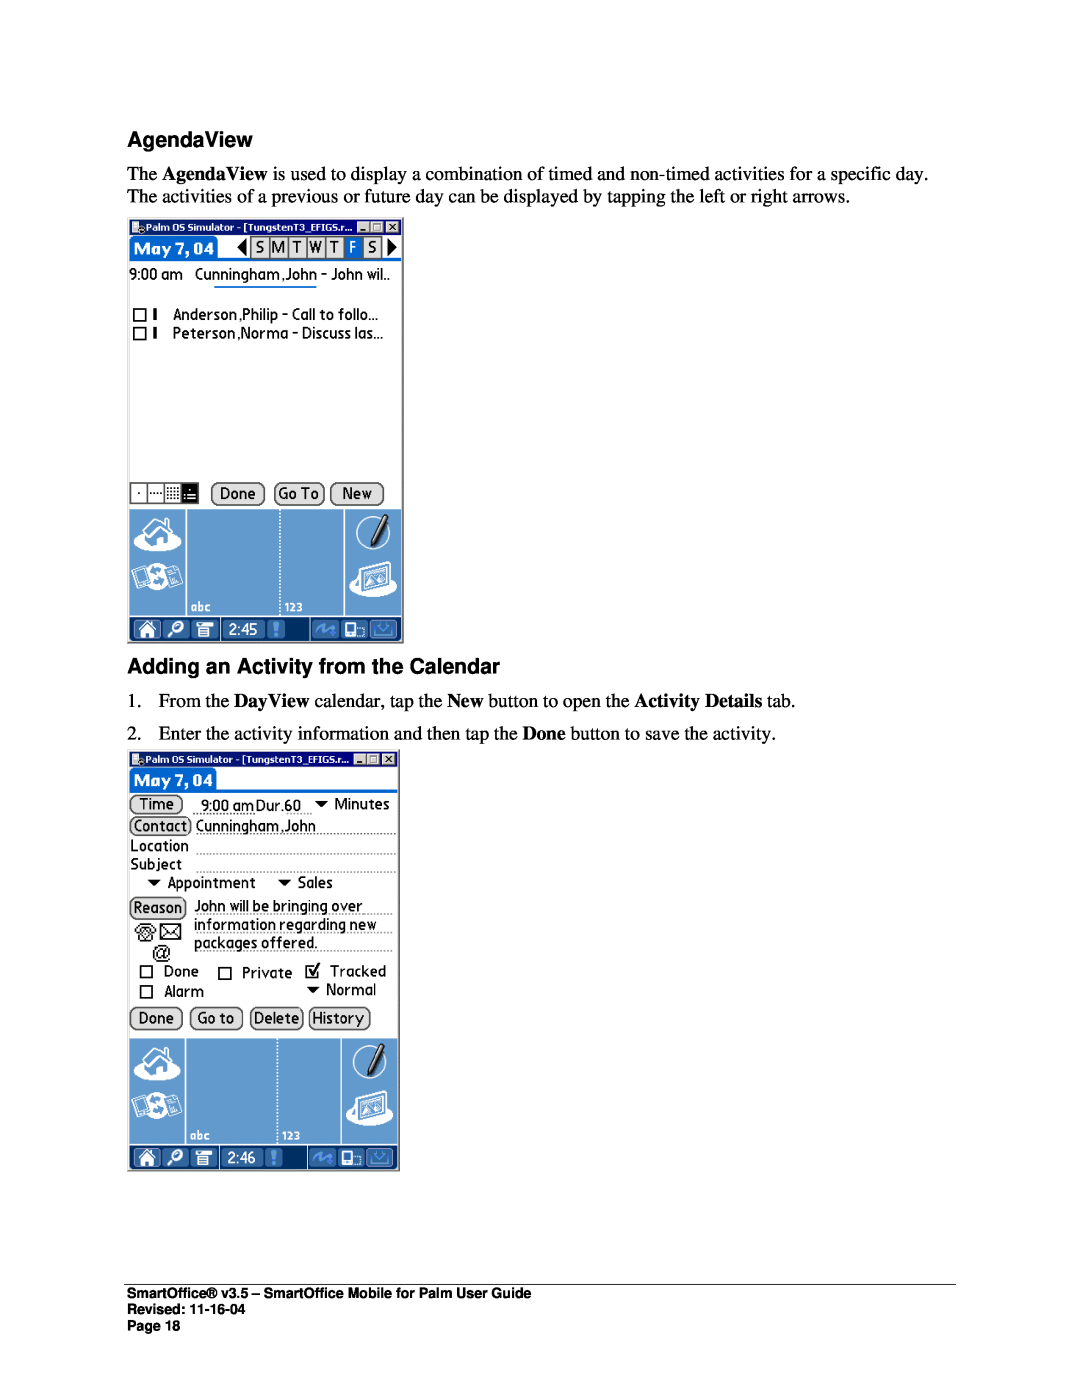 Palm SmartOffice Mobile manual AgendaView, Adding an Activity from the Calendar 